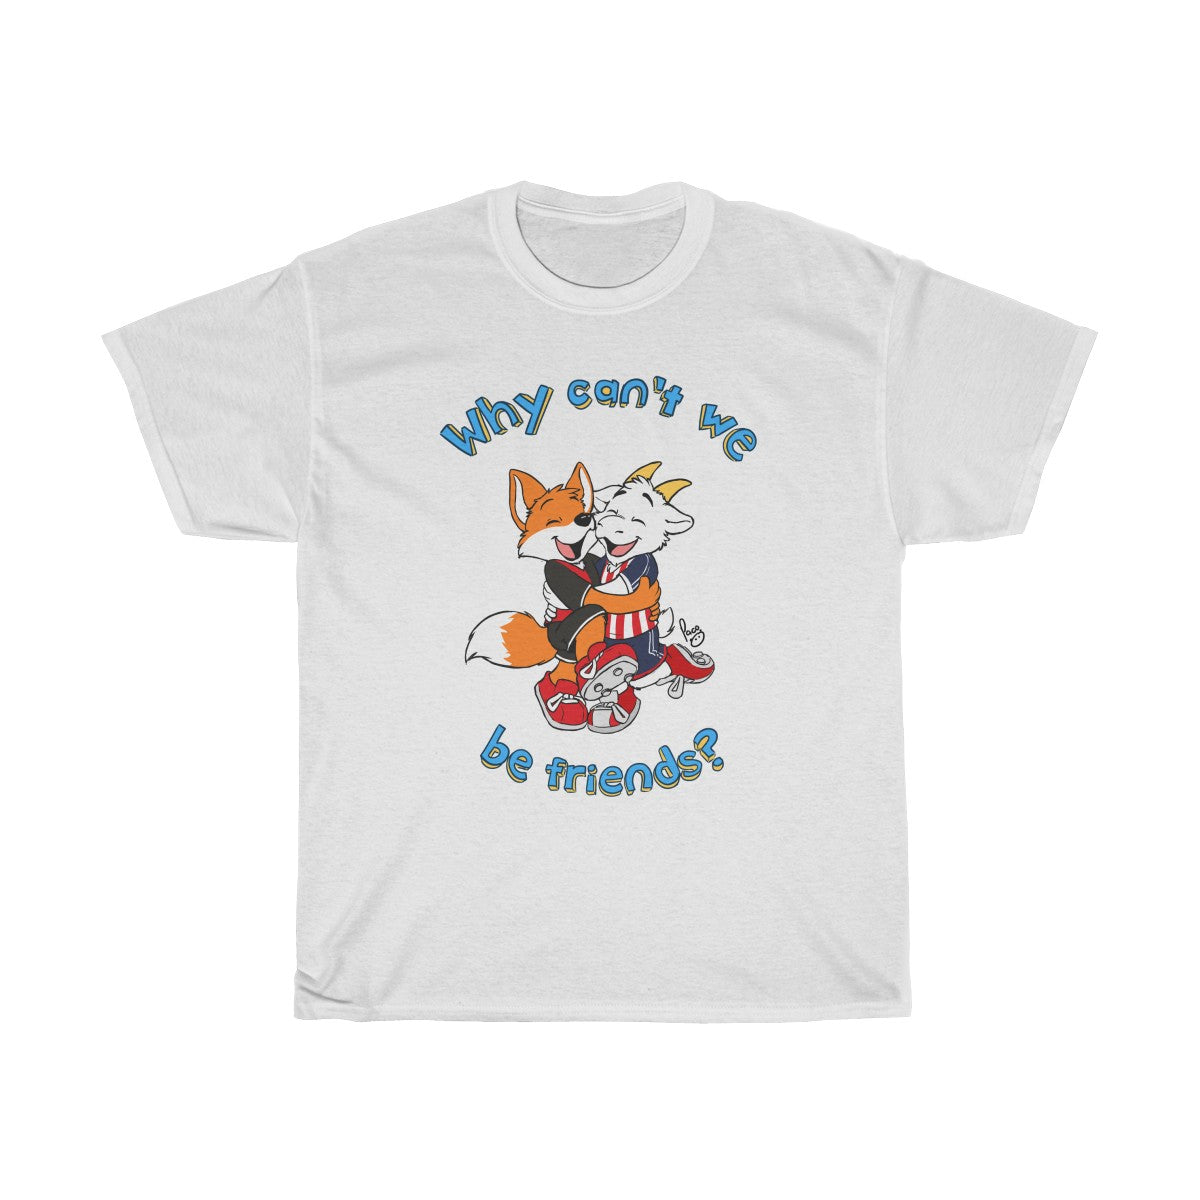 Why Can't we be Friends 2? - T-Shirt T-Shirt Paco Panda White S 